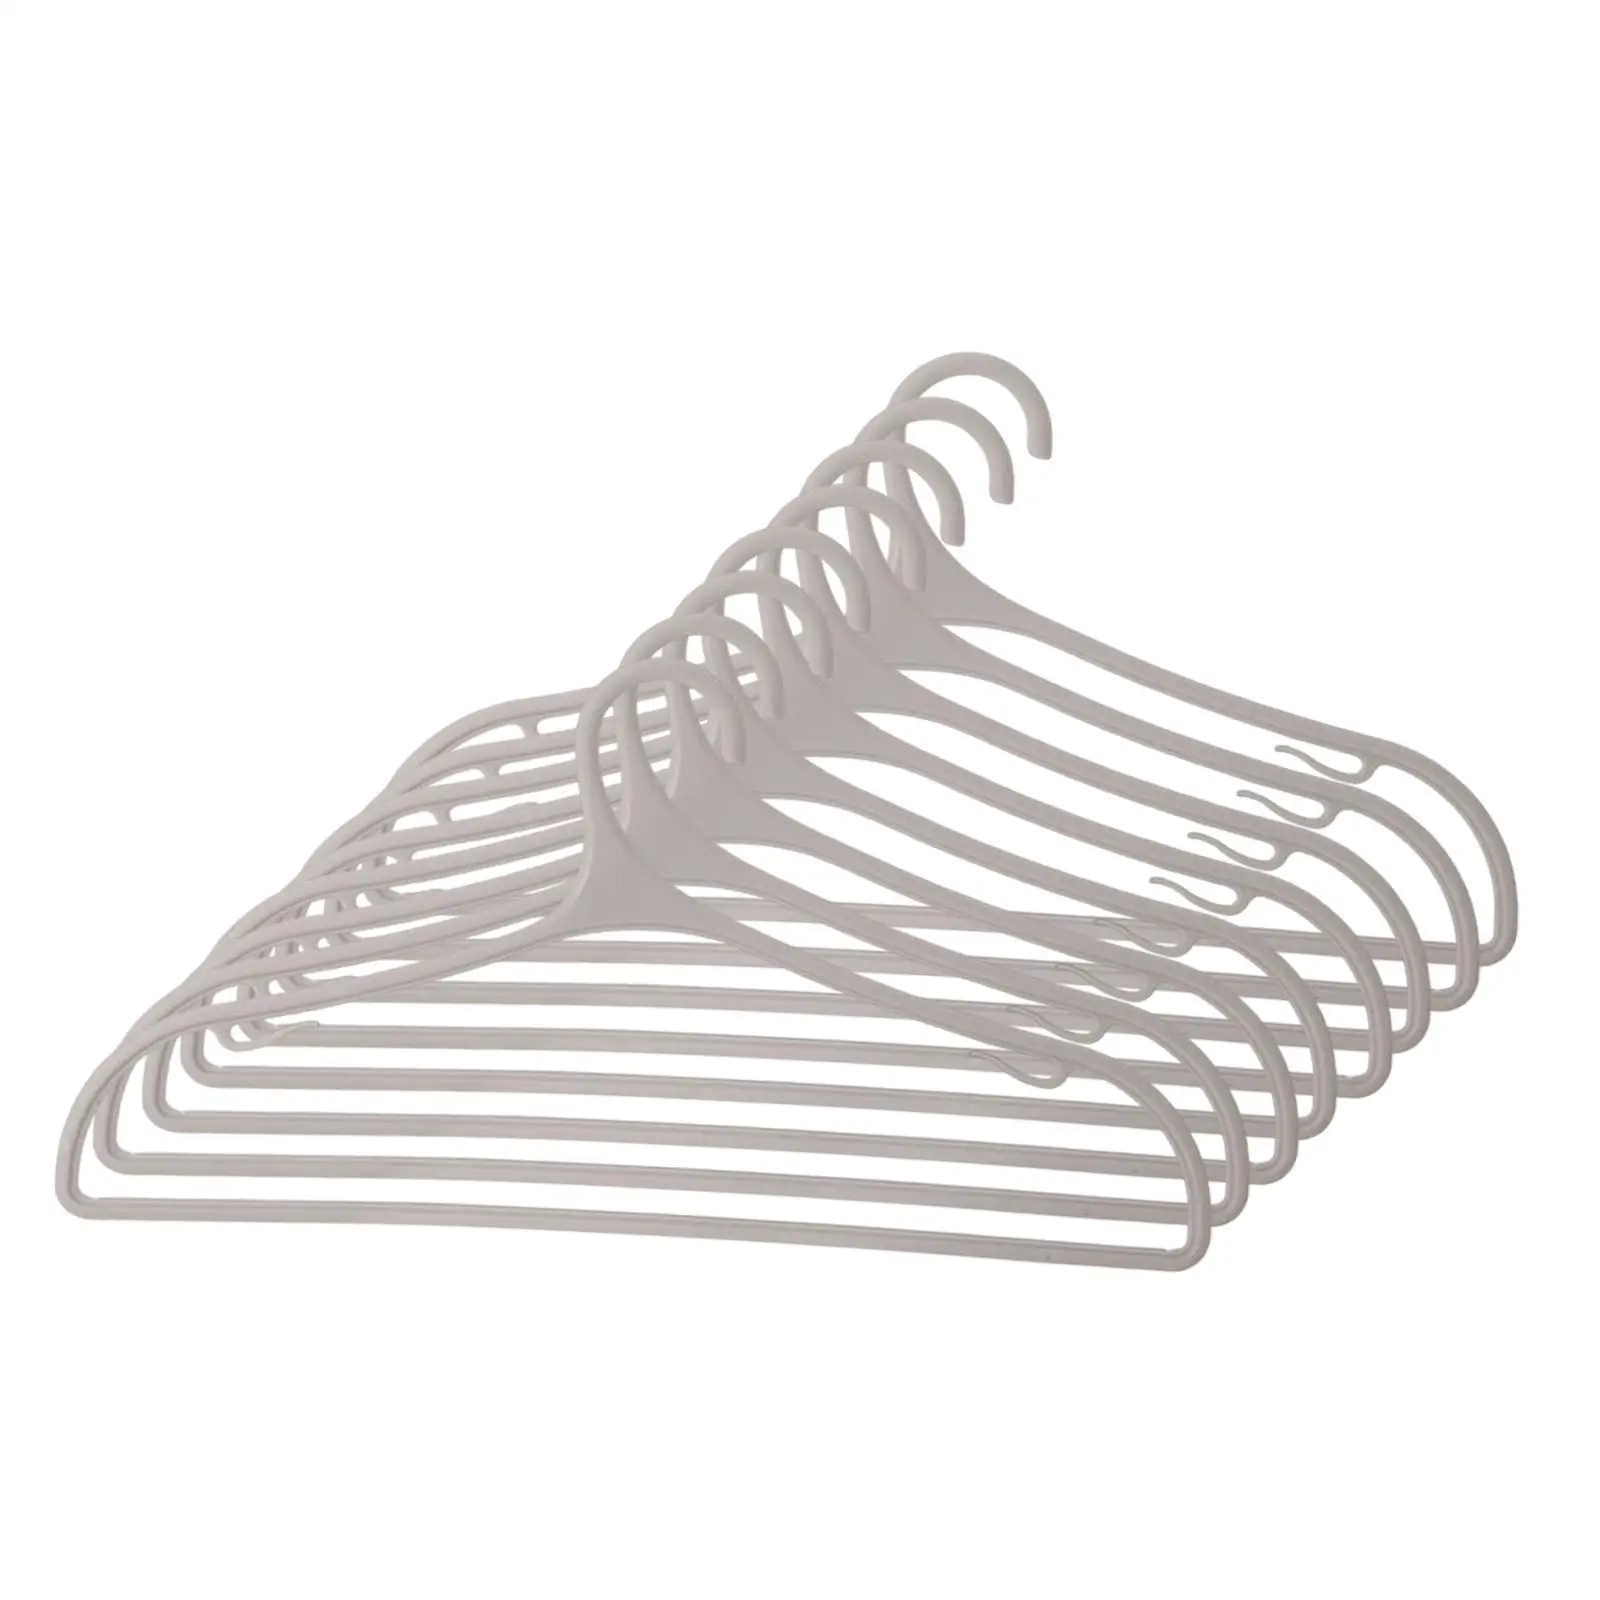 8Pcs Nonslip Hangers Hanging Drying Hangers Wide Shoulder Space Saving with Hooks for Household Laundry room Pants Socks